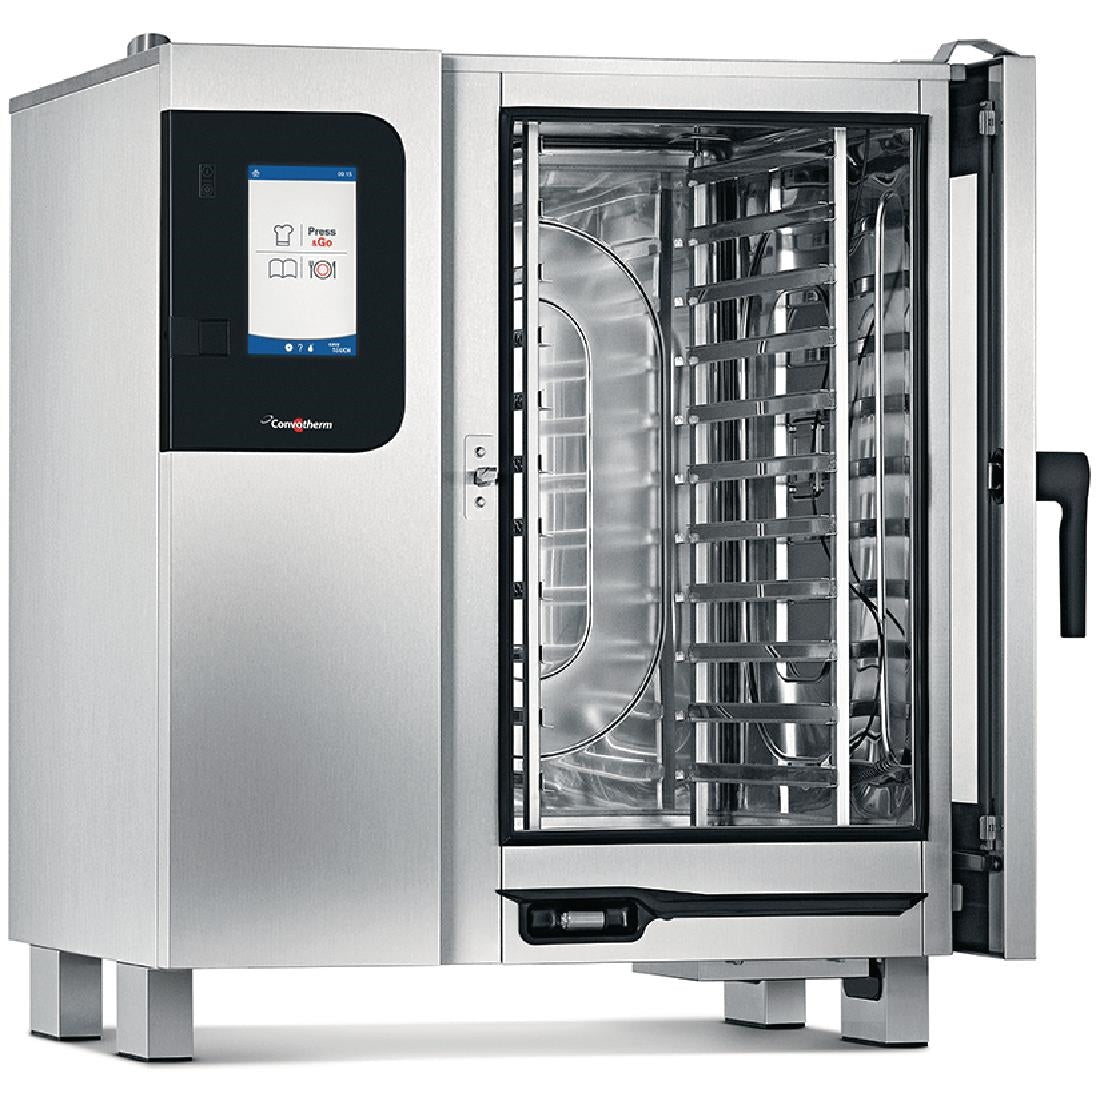 HC258-MO Convotherm 4 easyTouch Combi Oven 10 x 1 x1 GN Grid JD Catering Equipment Solutions Ltd